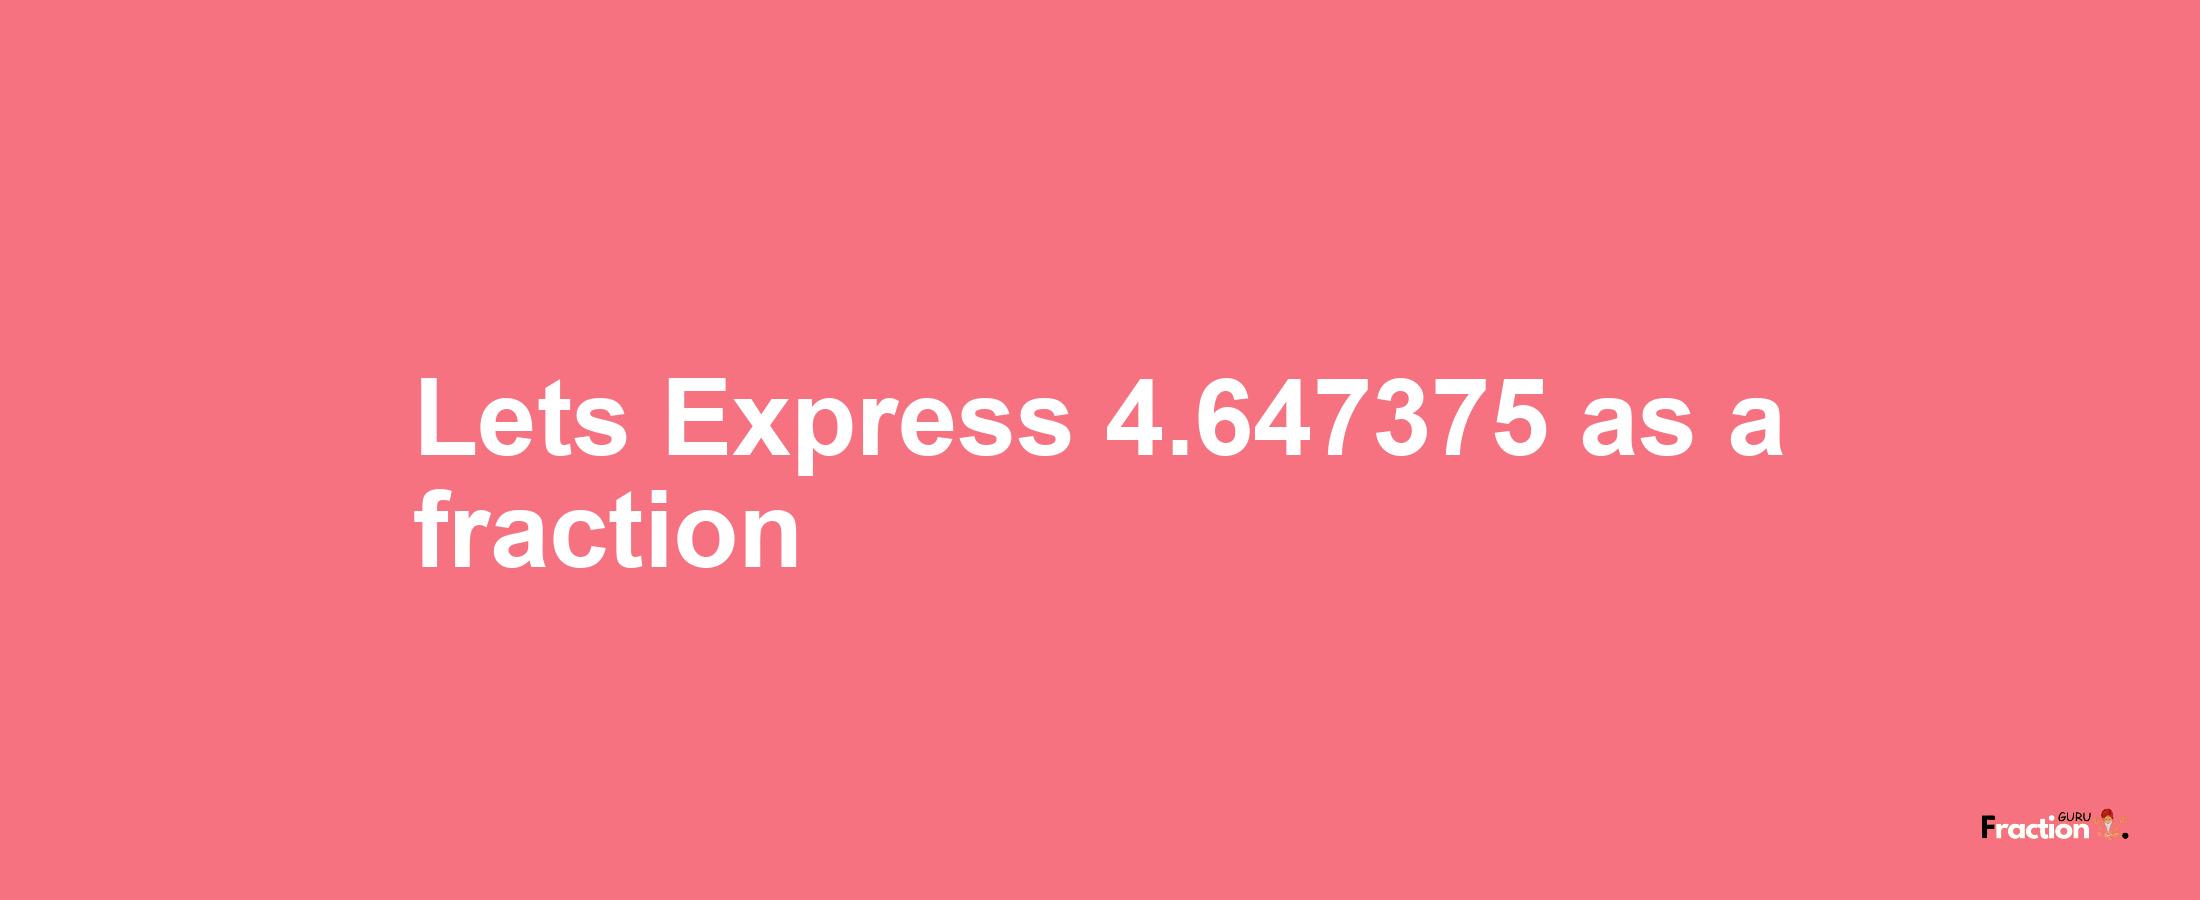 Lets Express 4.647375 as afraction